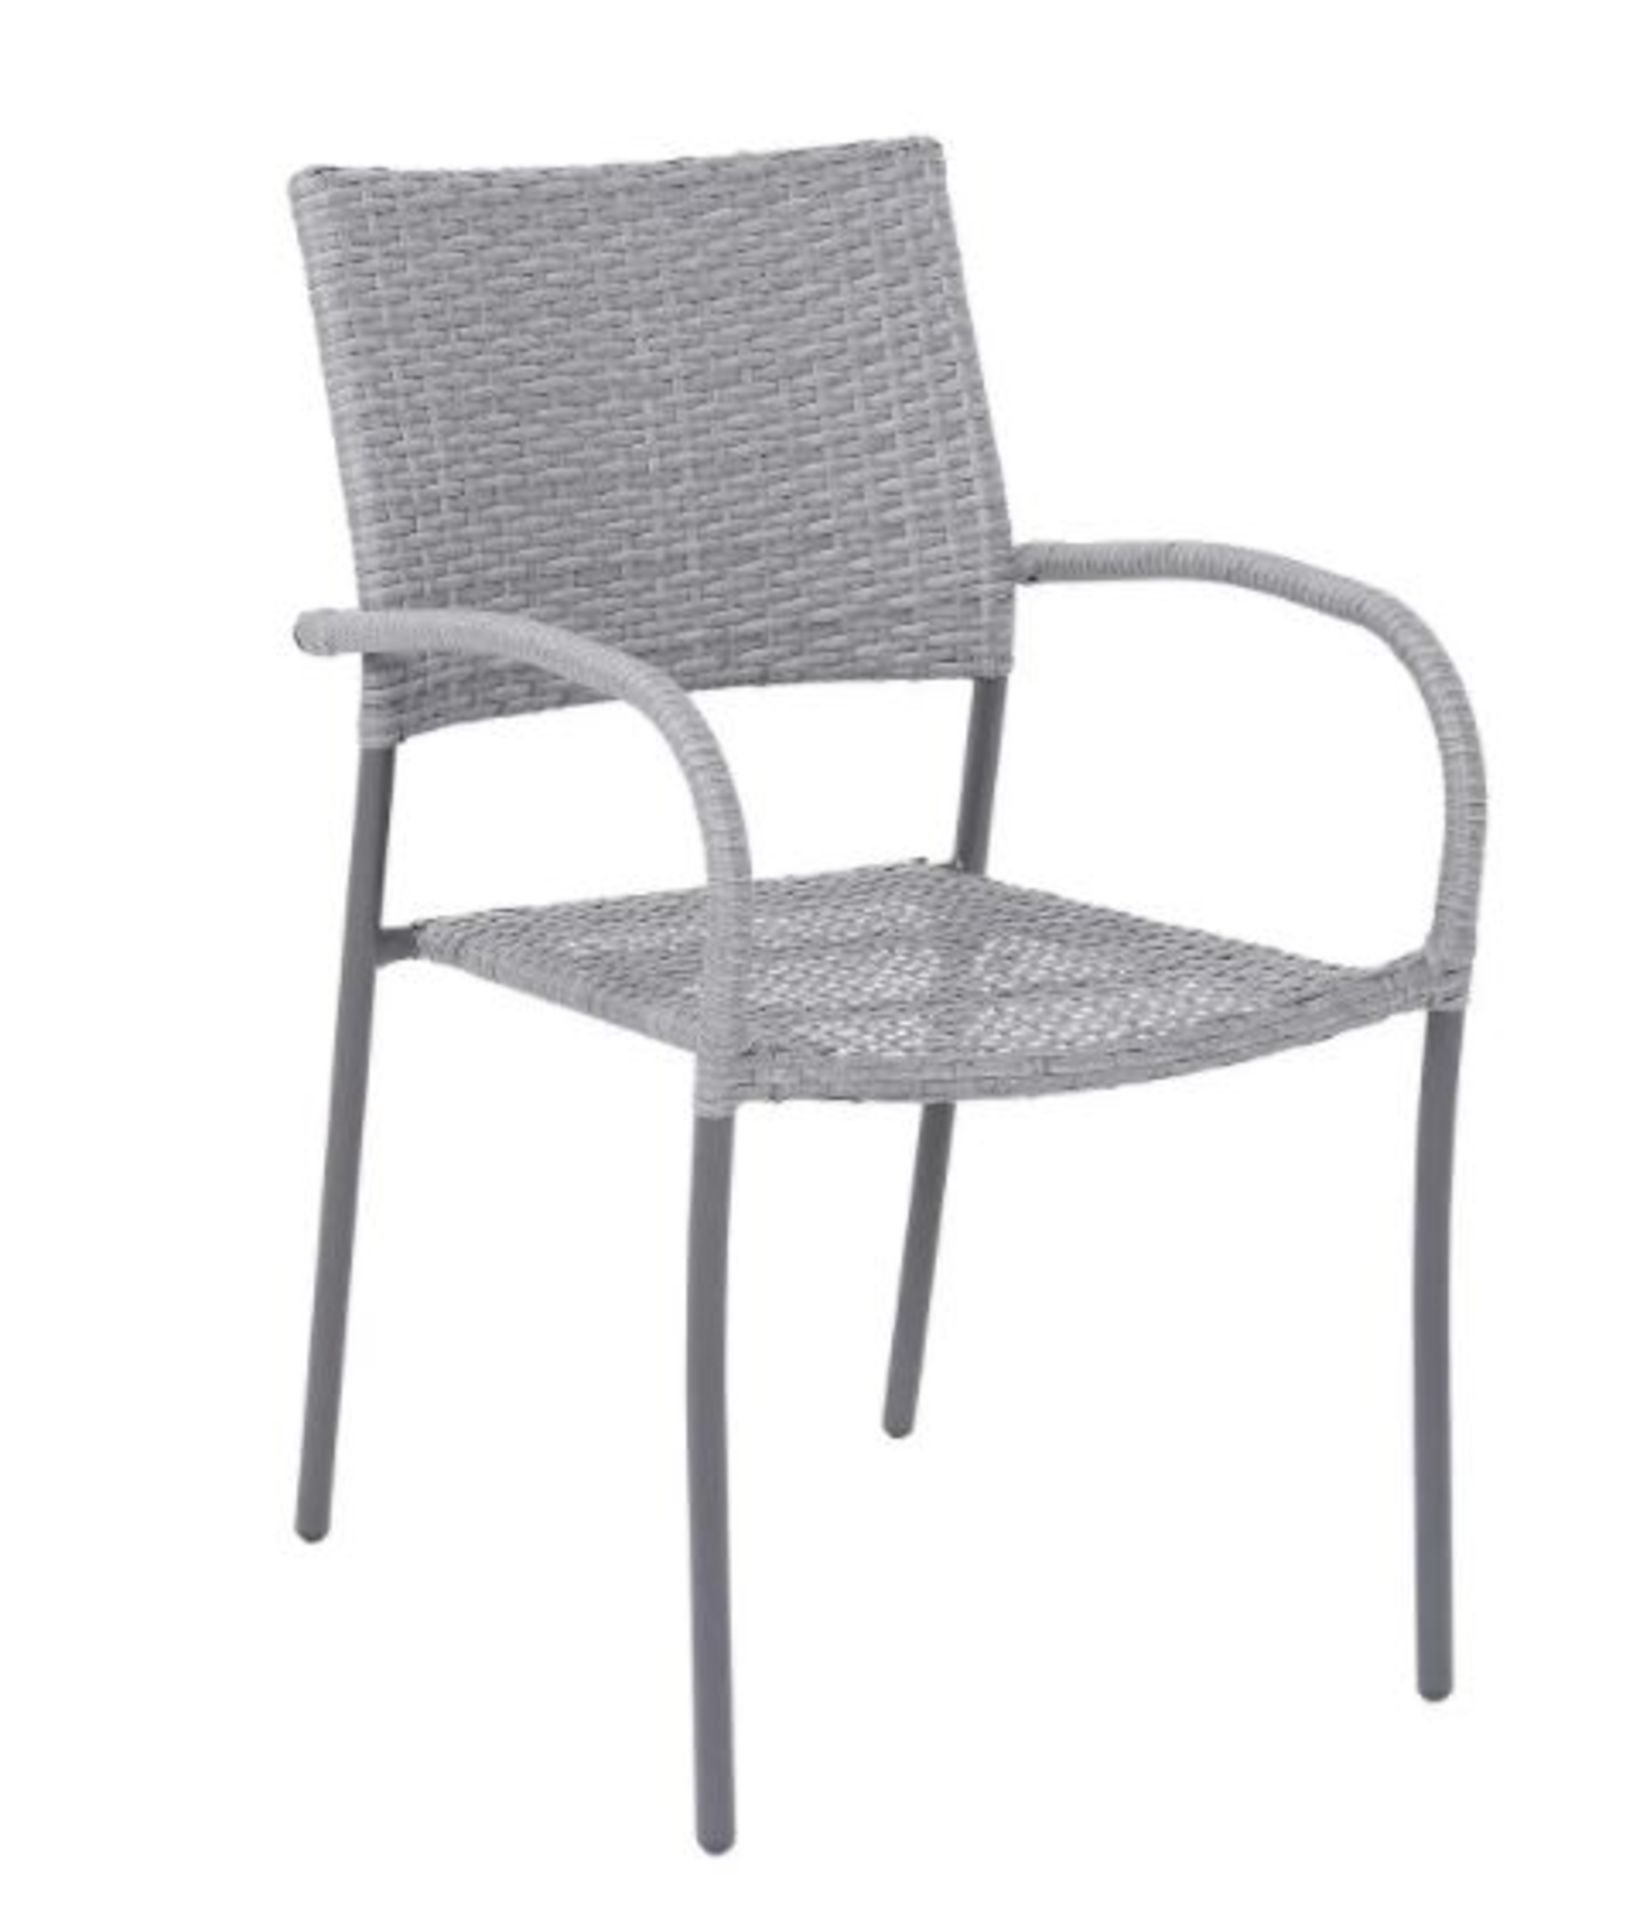 (R6J) 5x Synthetic Rattan Effect Stackable Chair. (1x Synthetic Rattan Damage To Chair Arm)